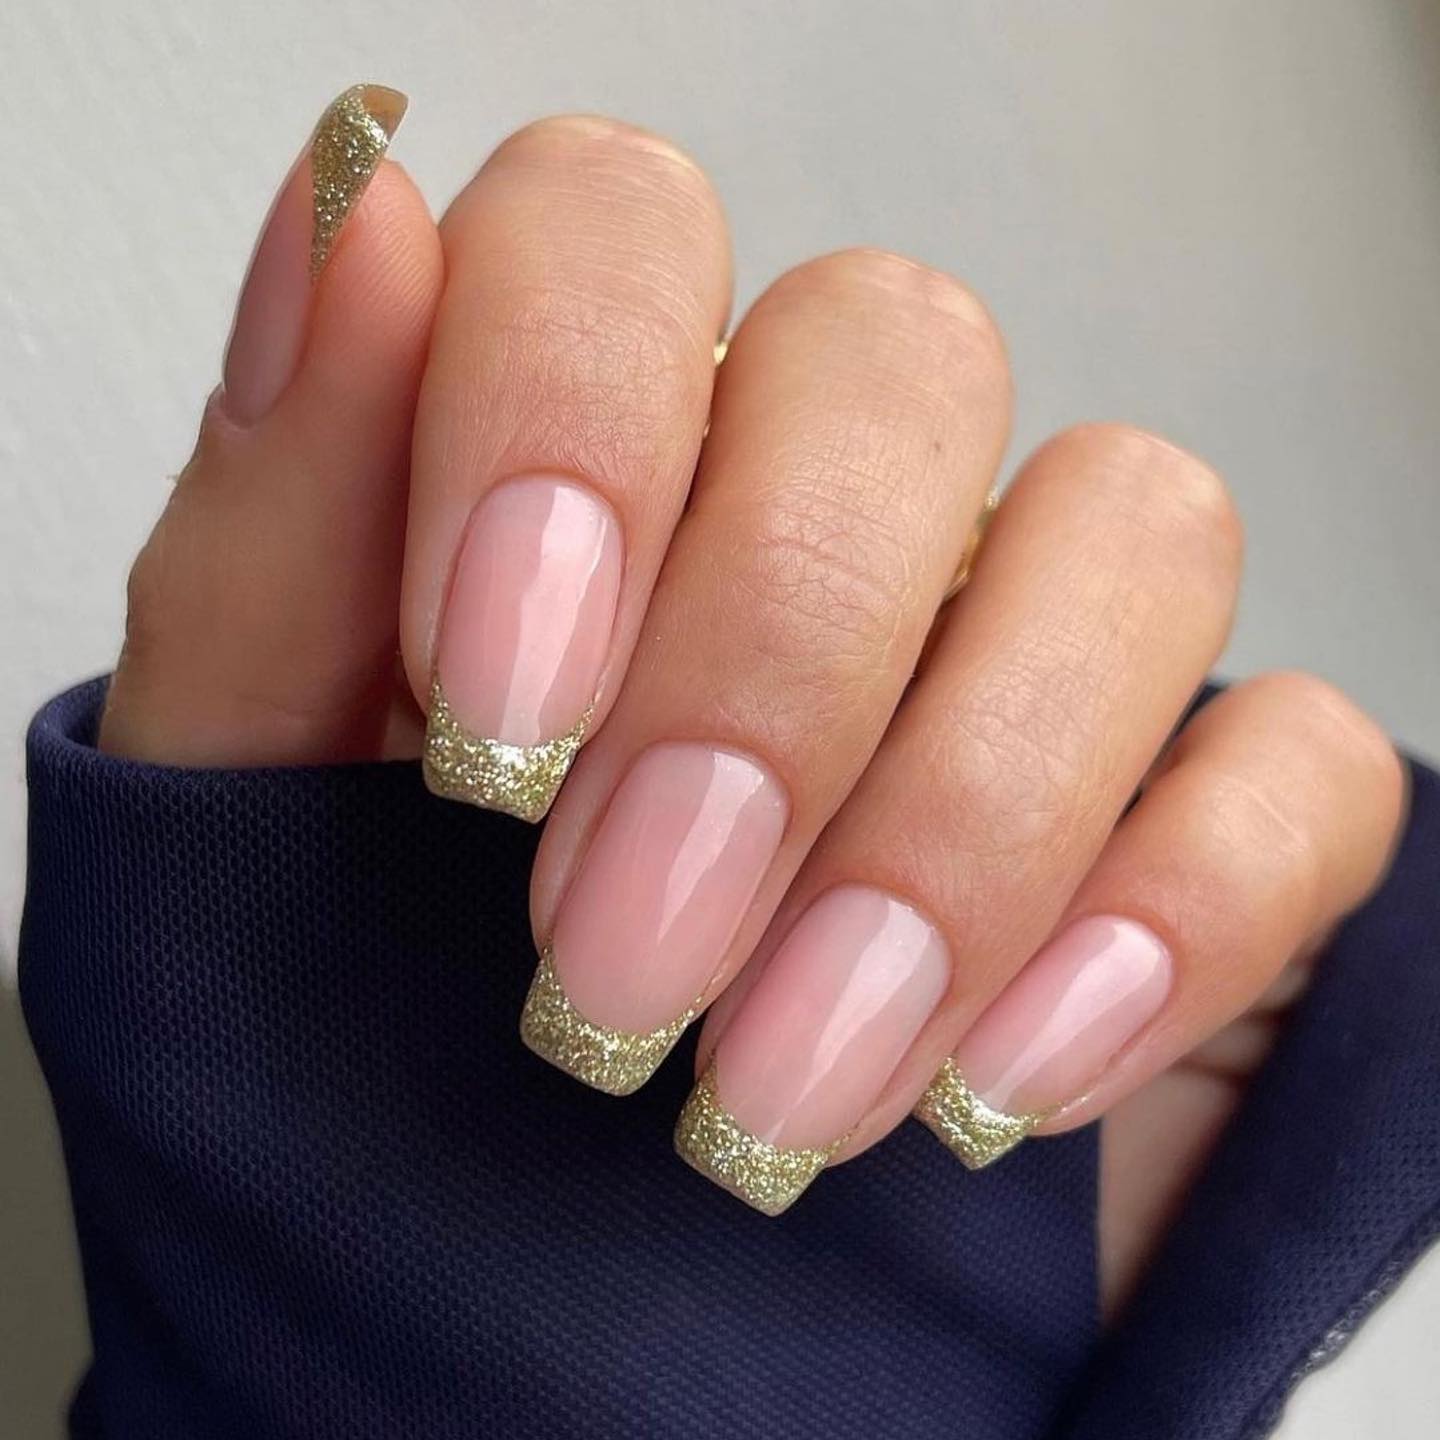 Short Square Nails with Glitter French Tips